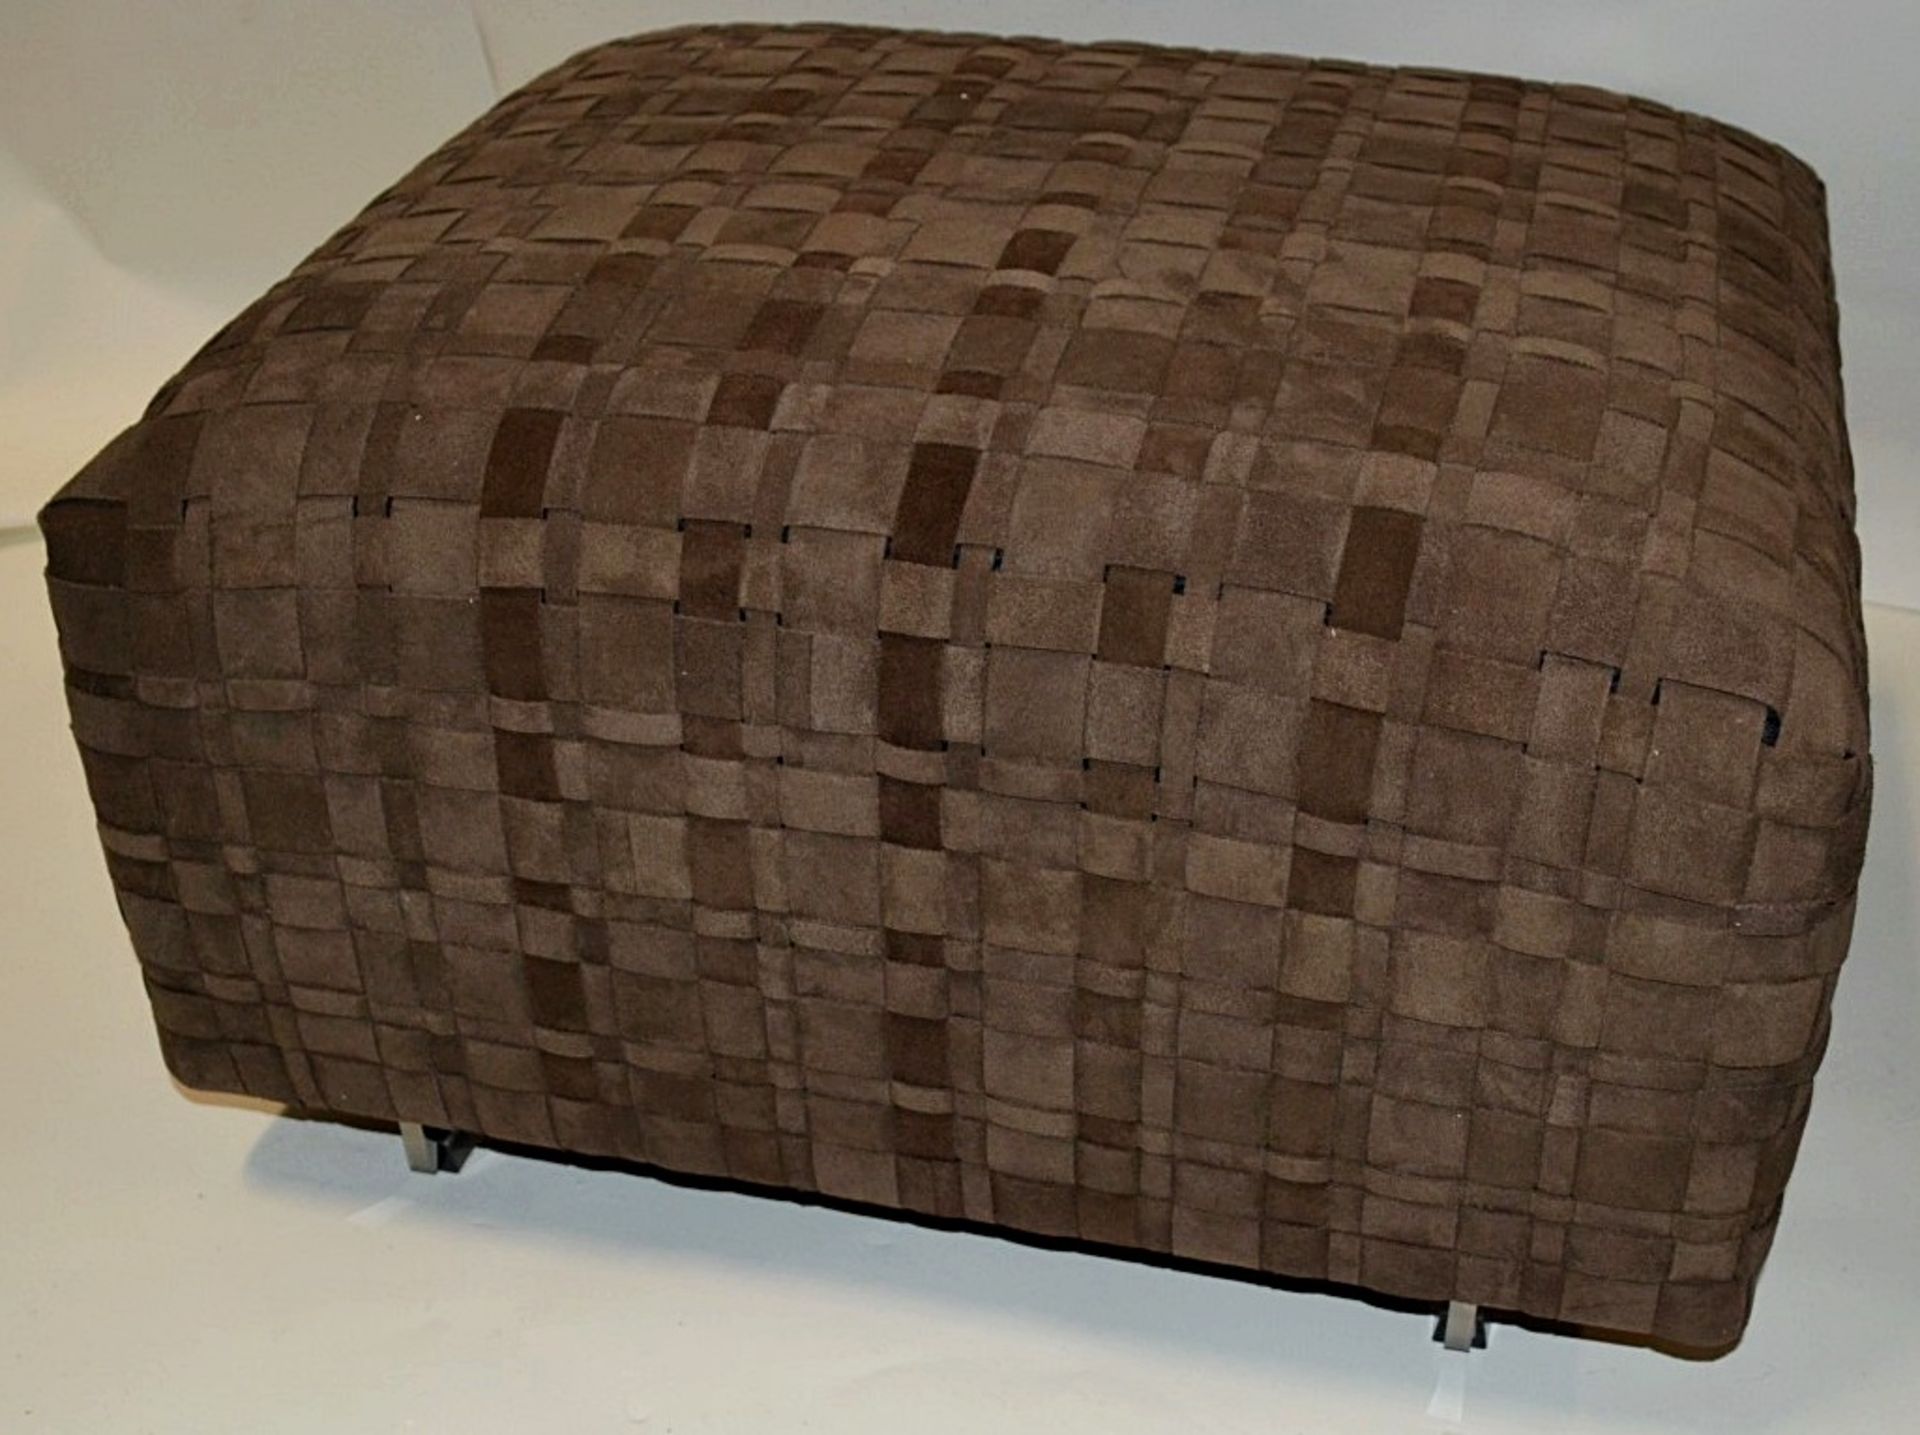 1 x Flexform Bangkok Ottoman - Elegantly Upholstered In Woven Strips of Brown Suede Leather - - Image 2 of 8